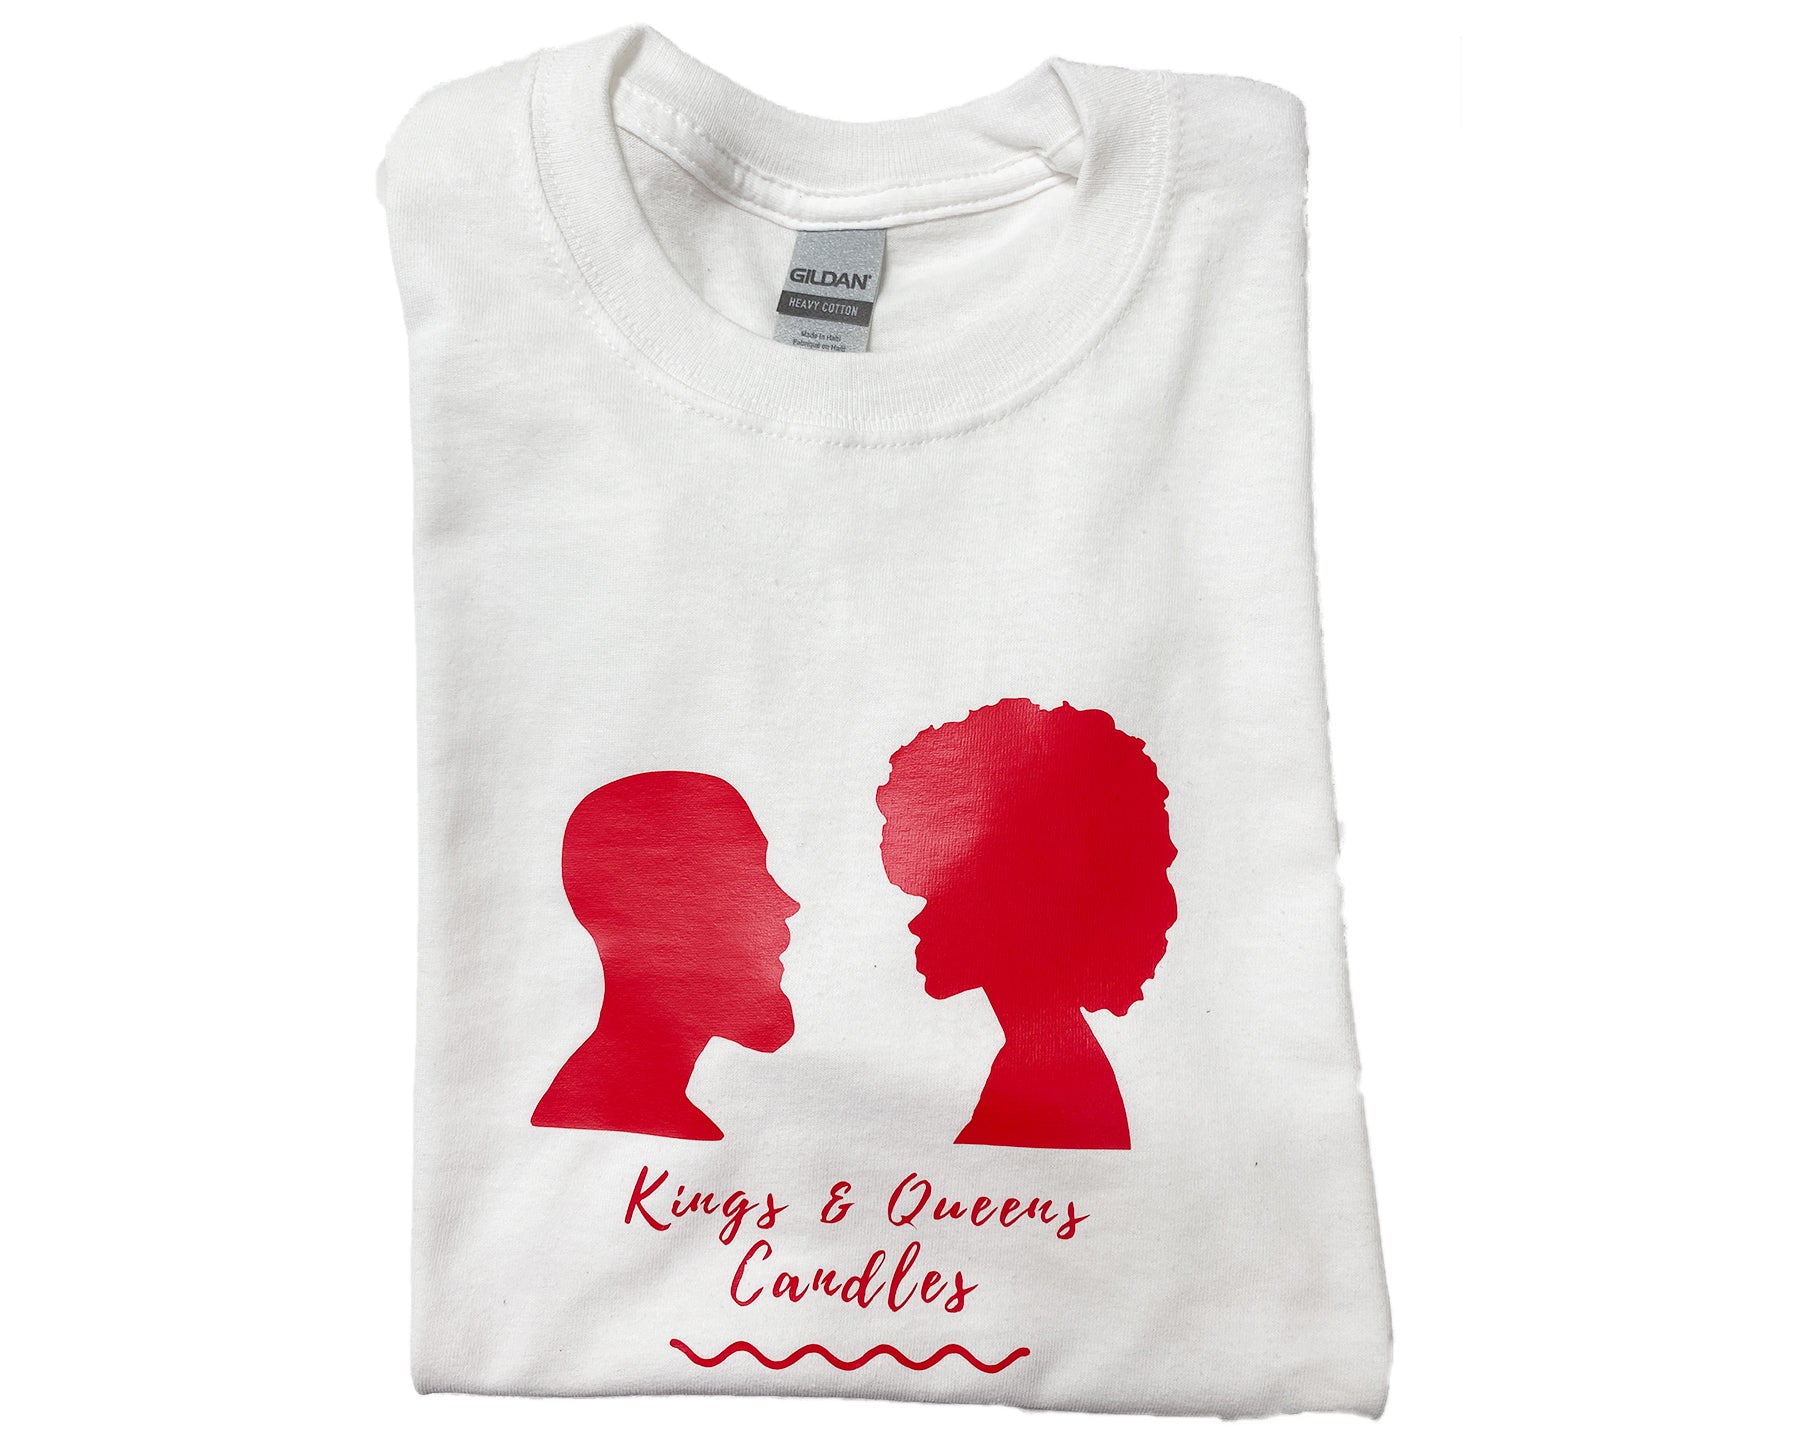 Kings & Queens Original (Red Logo) - Kings and Queens Candles